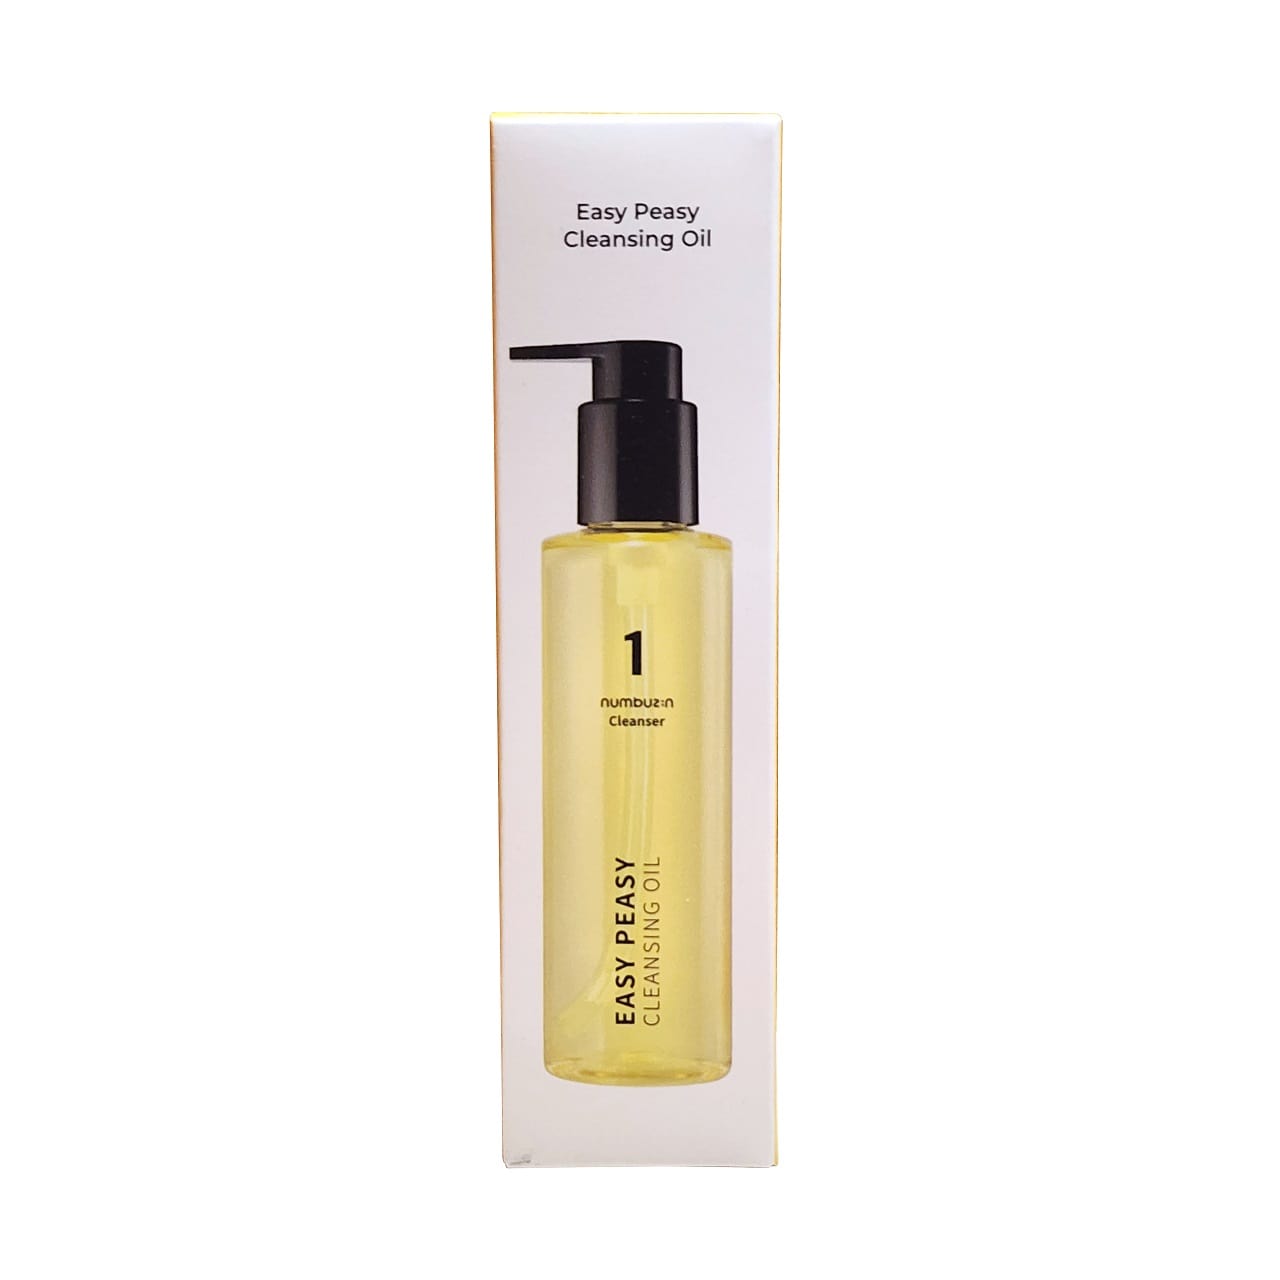 Product label for numbuzin No. 1 Easy Peasy Cleansing Oil (200 mL)